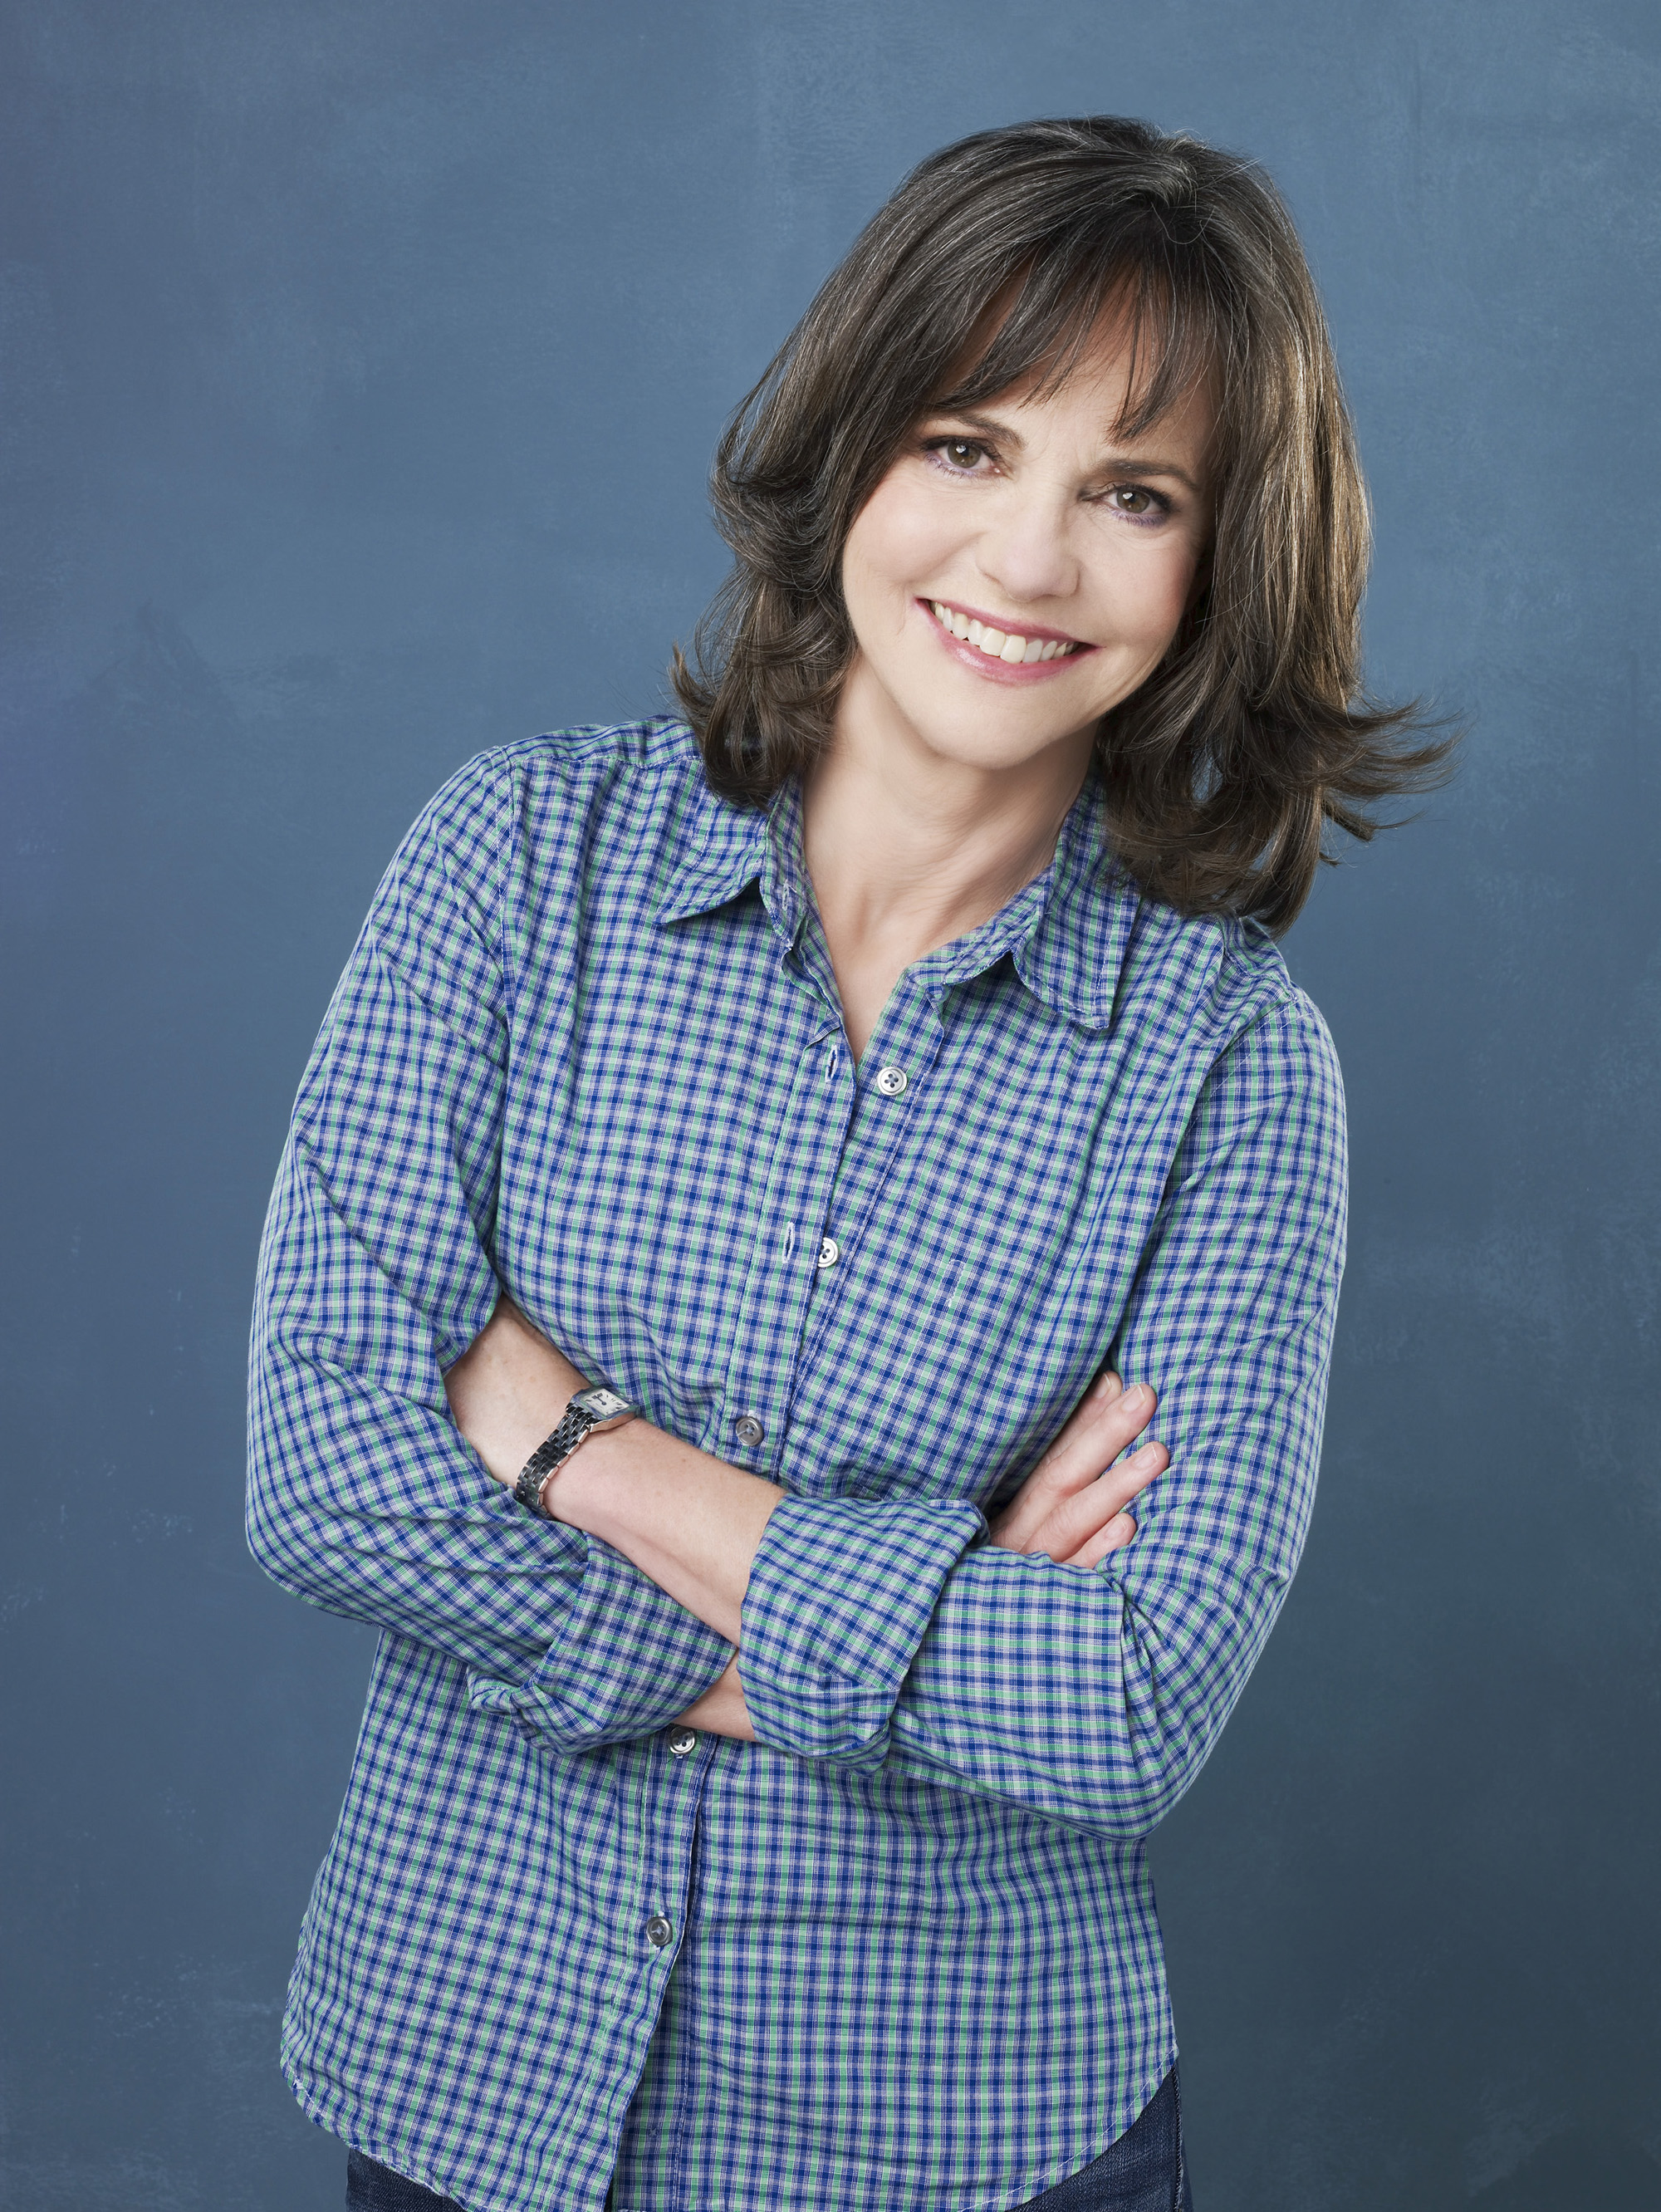 Sally Field Image HD Wallpaper And Background Photos